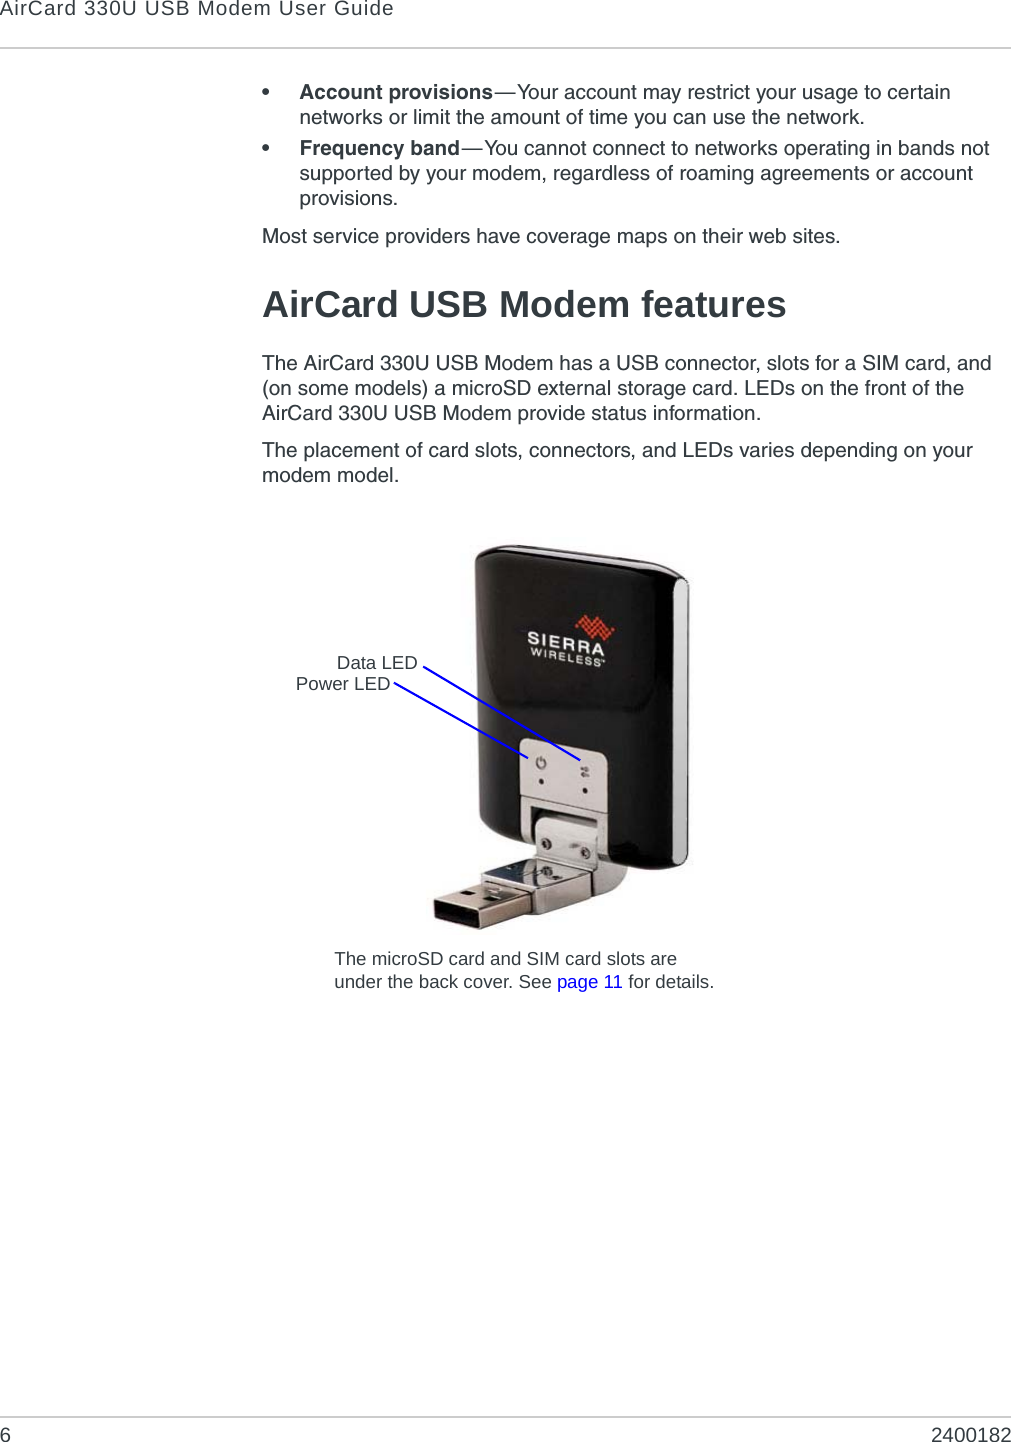 AirCard 330U USB Modem User Guide62400182• Account provisions—Your account may restrict your usage to certain networks or limit the amount of time you can use the network.• Frequency band—You cannot connect to networks operating in bands not supported by your modem, regardless of roaming agreements or account provisions.Most service providers have coverage maps on their web sites.AirCard USB Modem featuresThe AirCard 330U USB Modem has a USB connector, slots for a SIM card, and (on some models) a microSD external storage card. LEDs on the front of the AirCard 330U USB Modem provide status information.The placement of card slots, connectors, and LEDs varies depending on your modem model.Power LEDData LEDThe microSD card and SIM card slots are under the back cover. See page 11 for details.